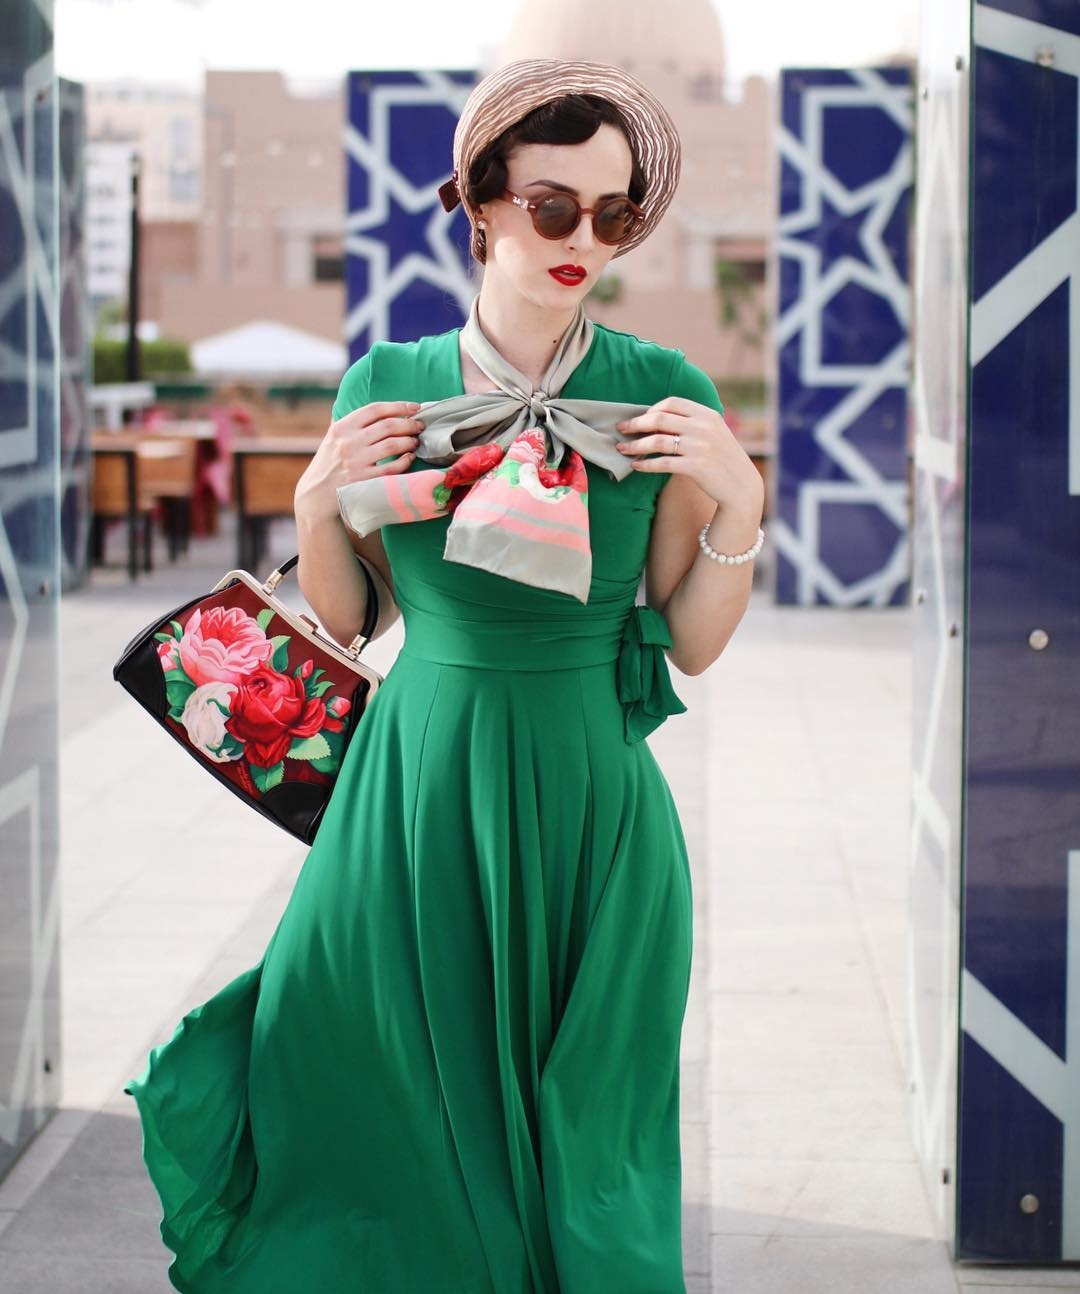 Vintage Chic for Topvintage - Layla Cross Over jurk in groen 3